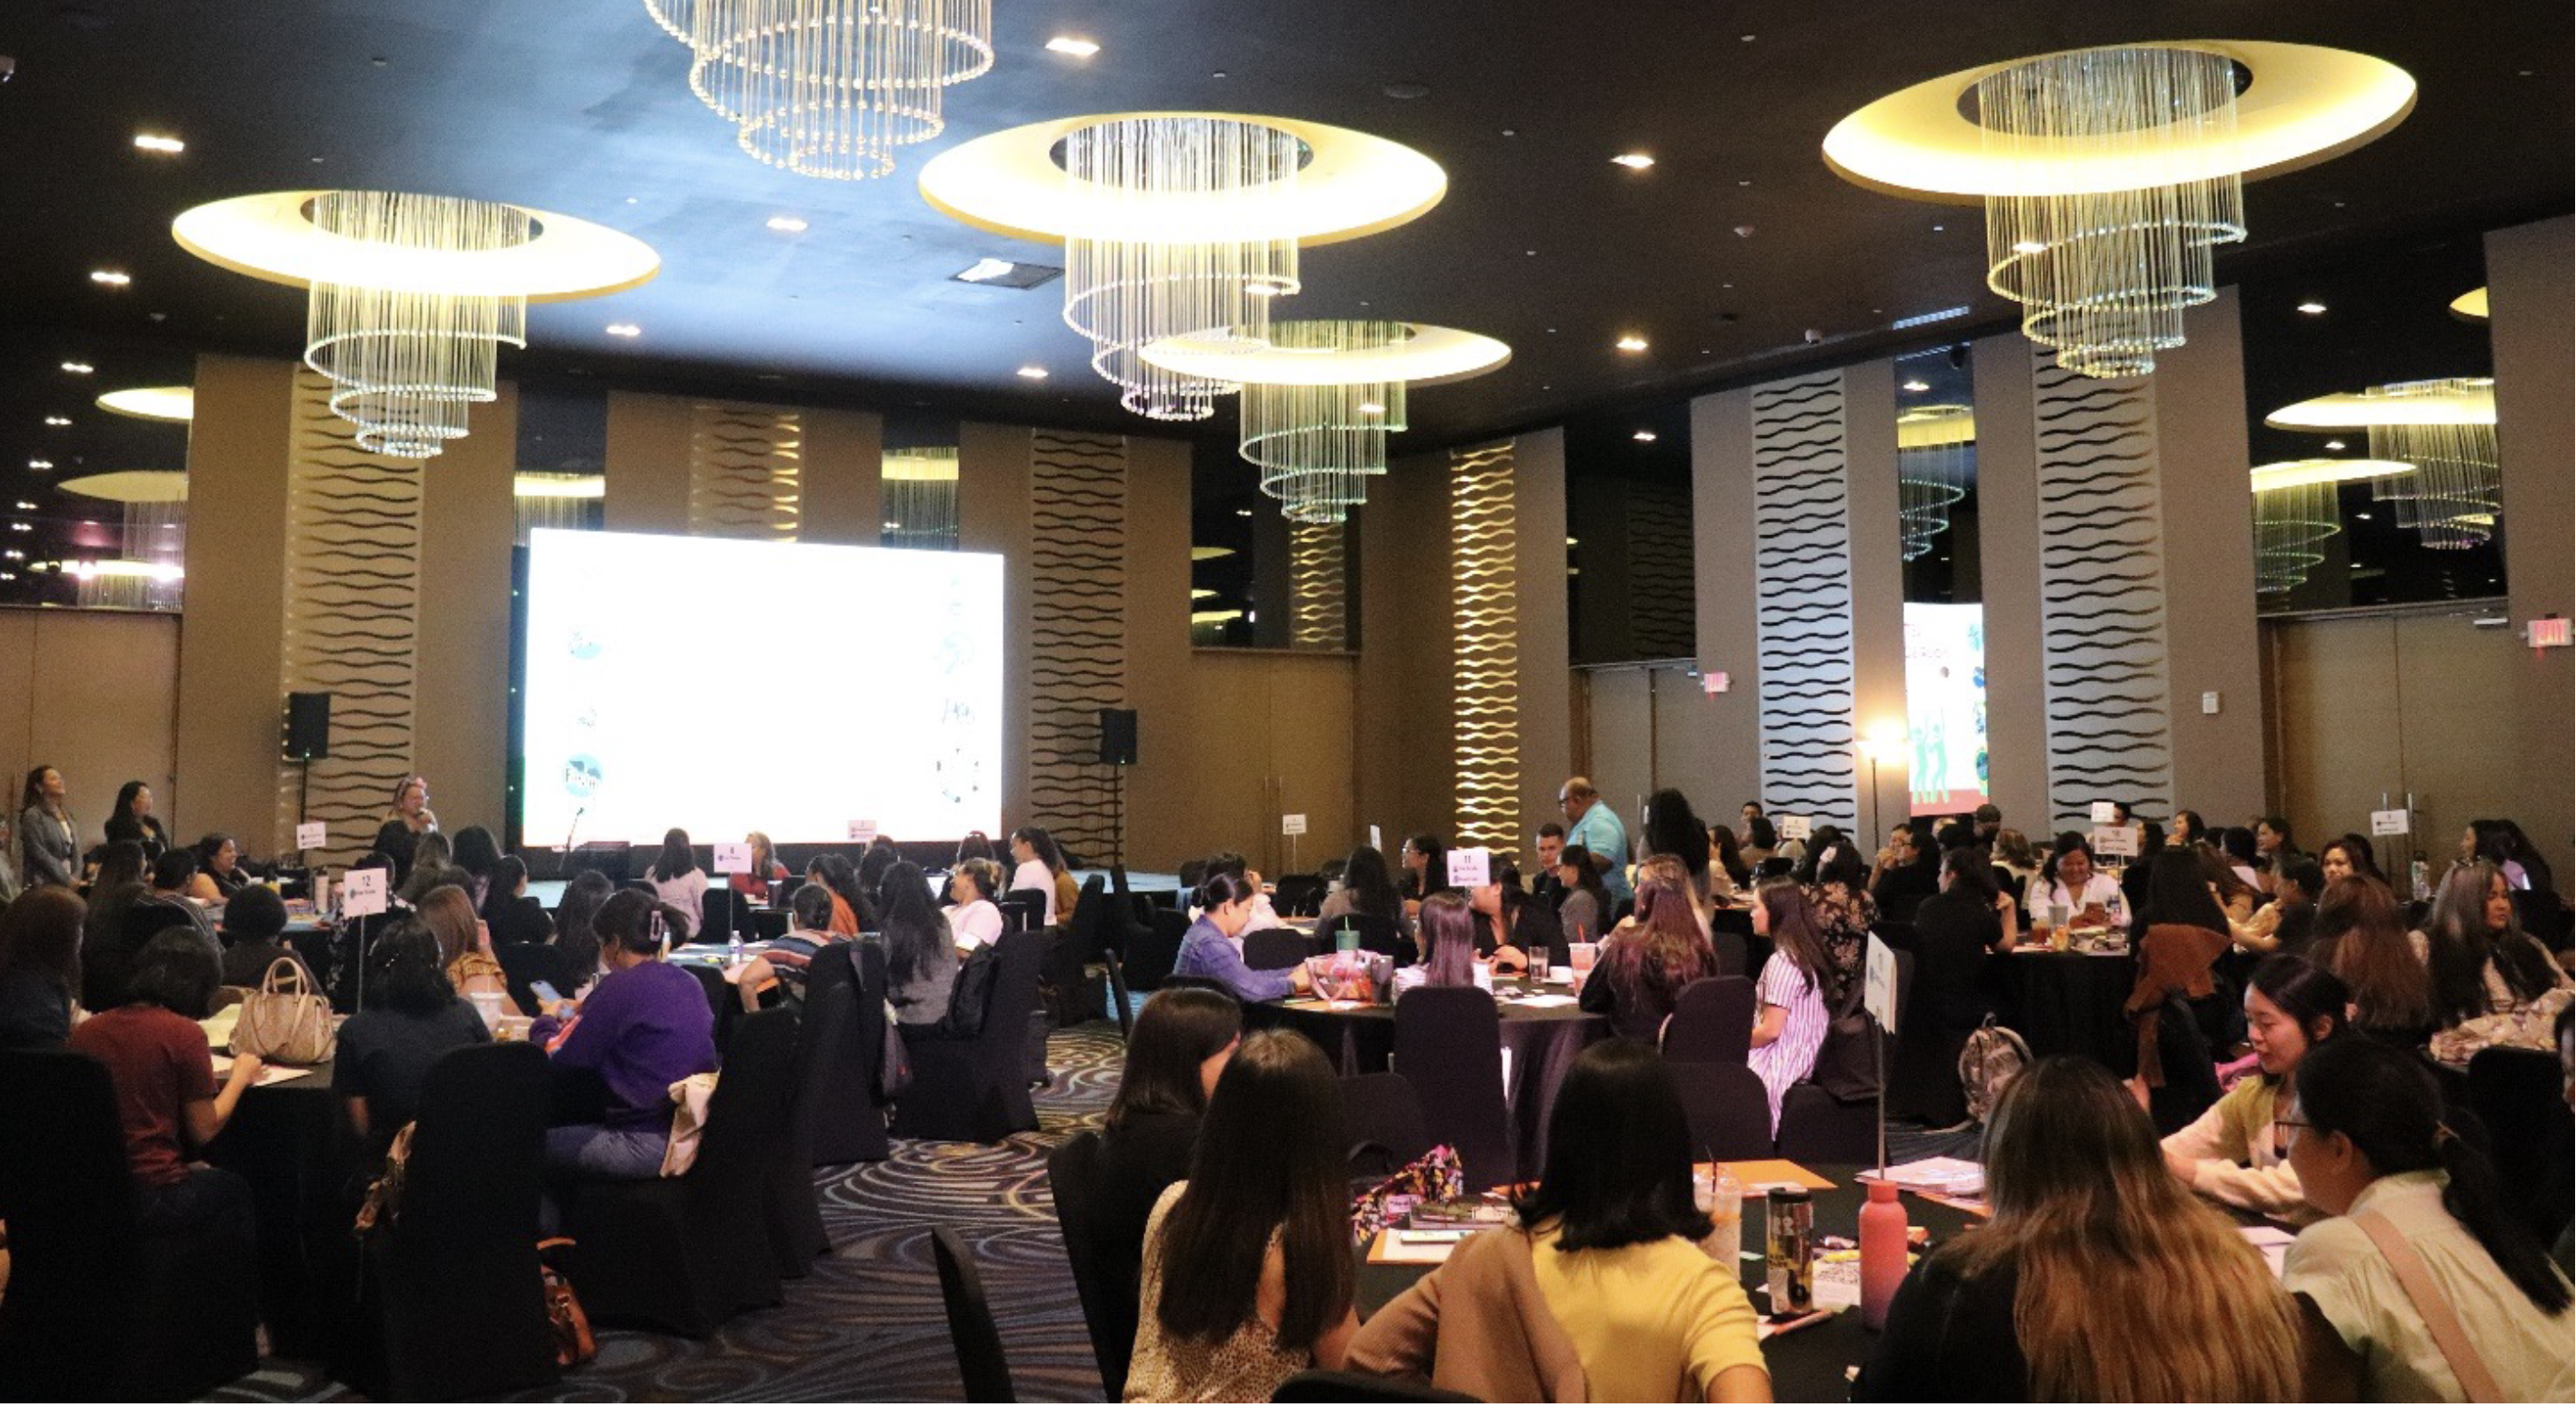 On August 7, GDOE SSIP elementary school principals lead their schools in a school cheer to start off the session, “The Magic is in the Instruction,” at the Dusit Thani Hotel in Tumon.